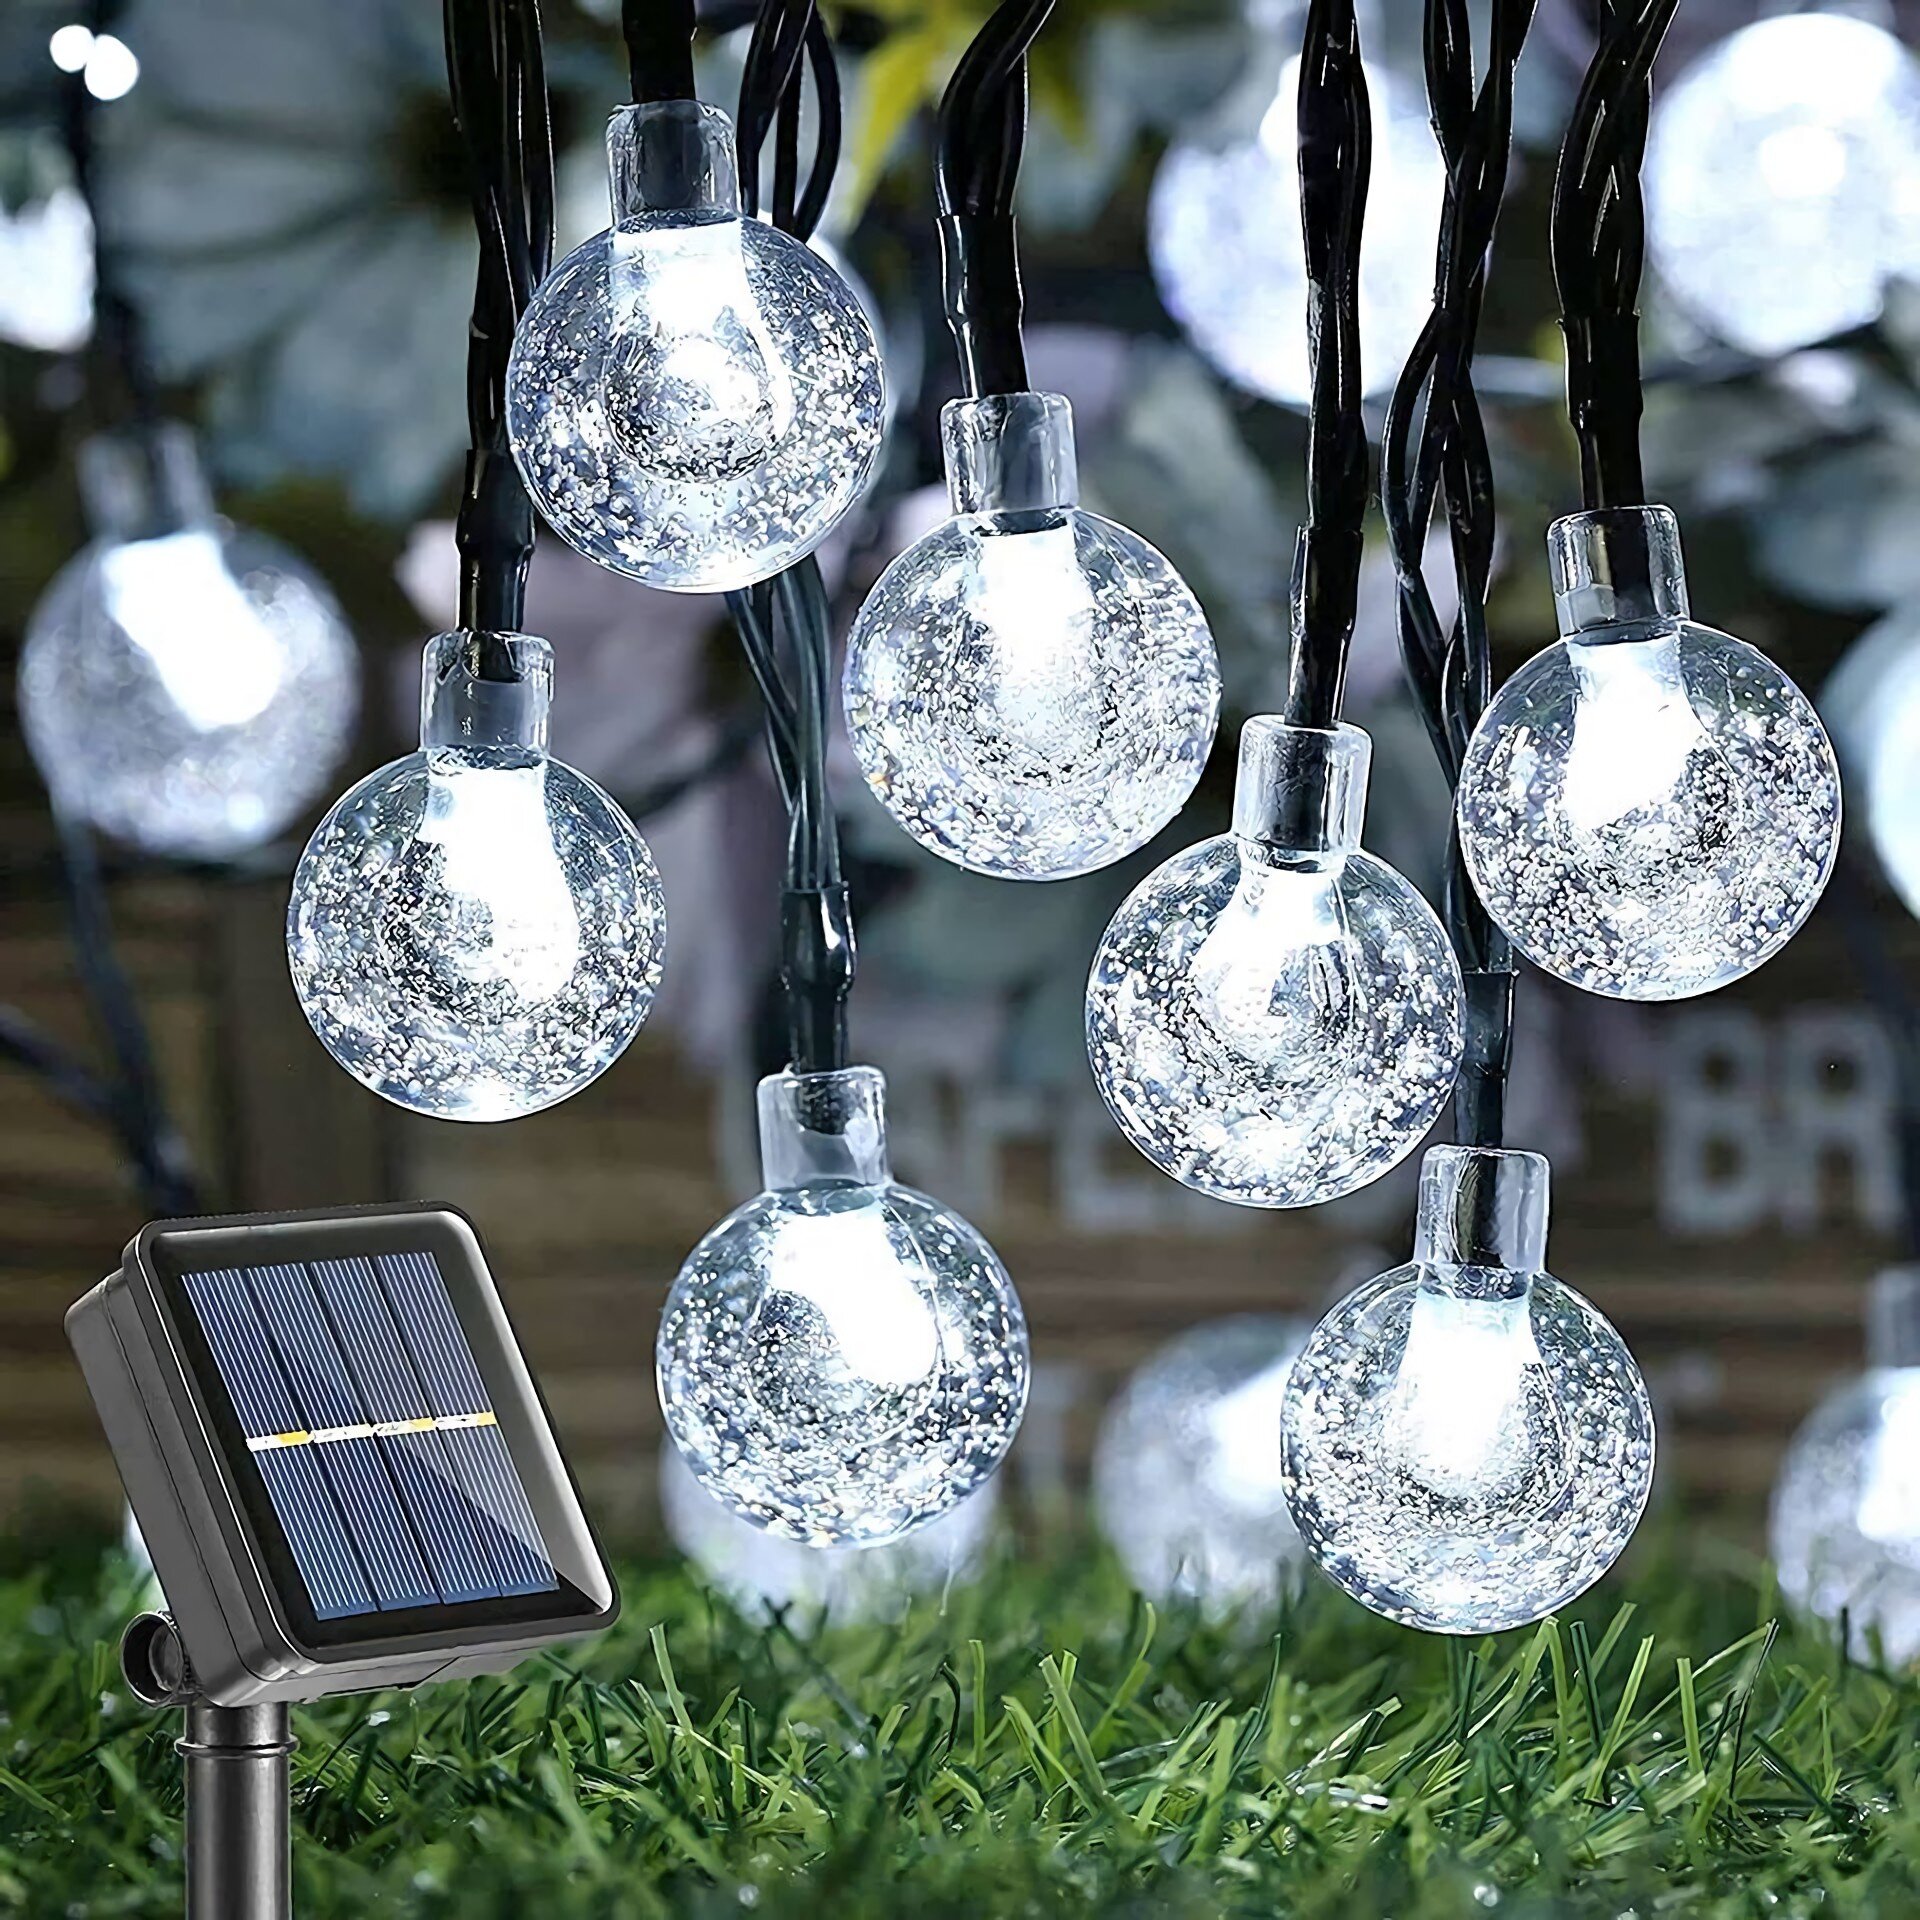 20ft 30 LED Solar String Ball Lights Waterproof Garden Party Outdoor Decor White